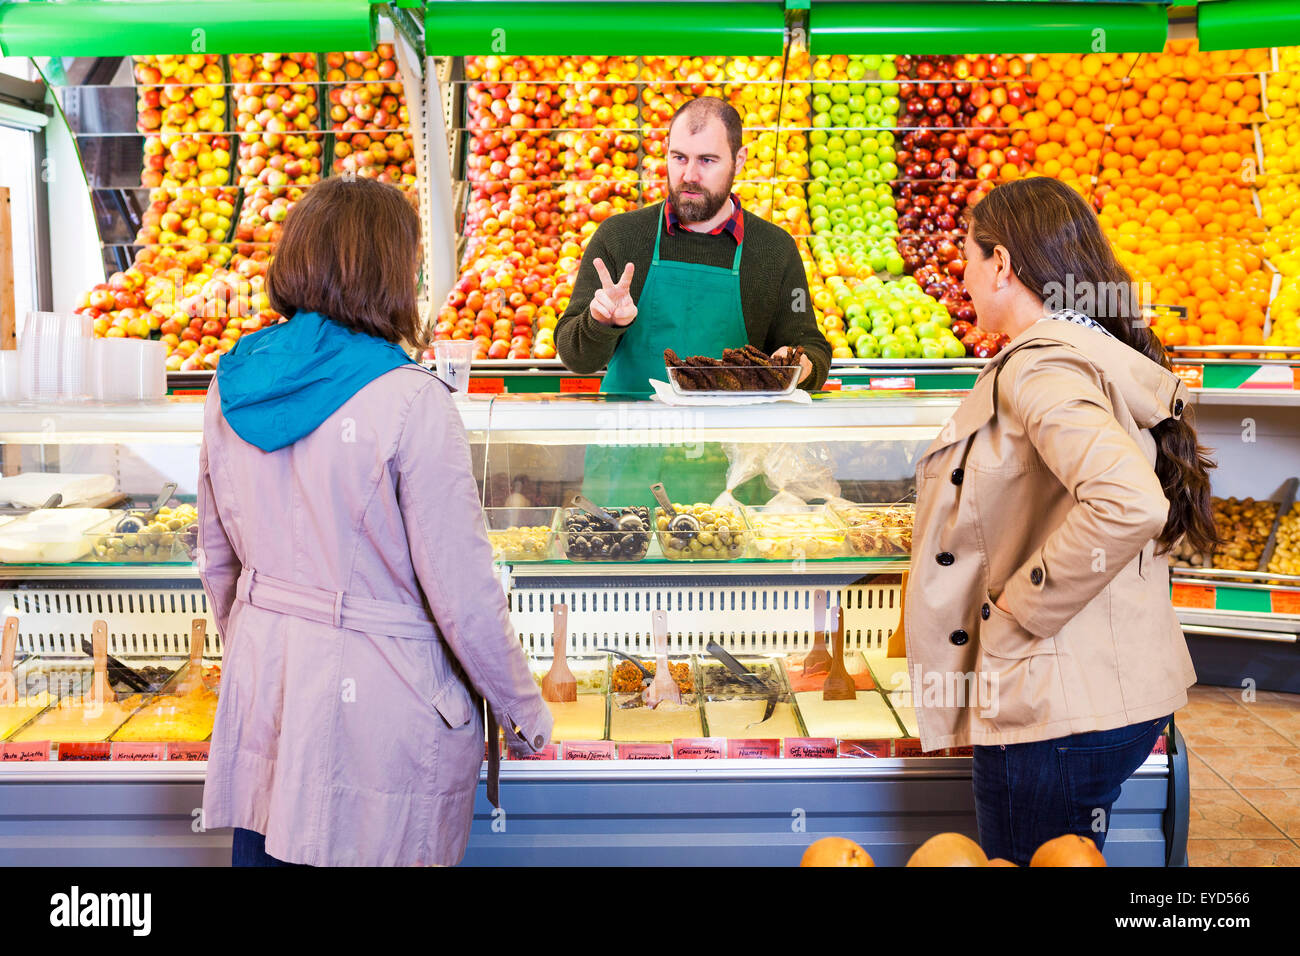 Female customers shopping in greengrocer's shop Stock Photo